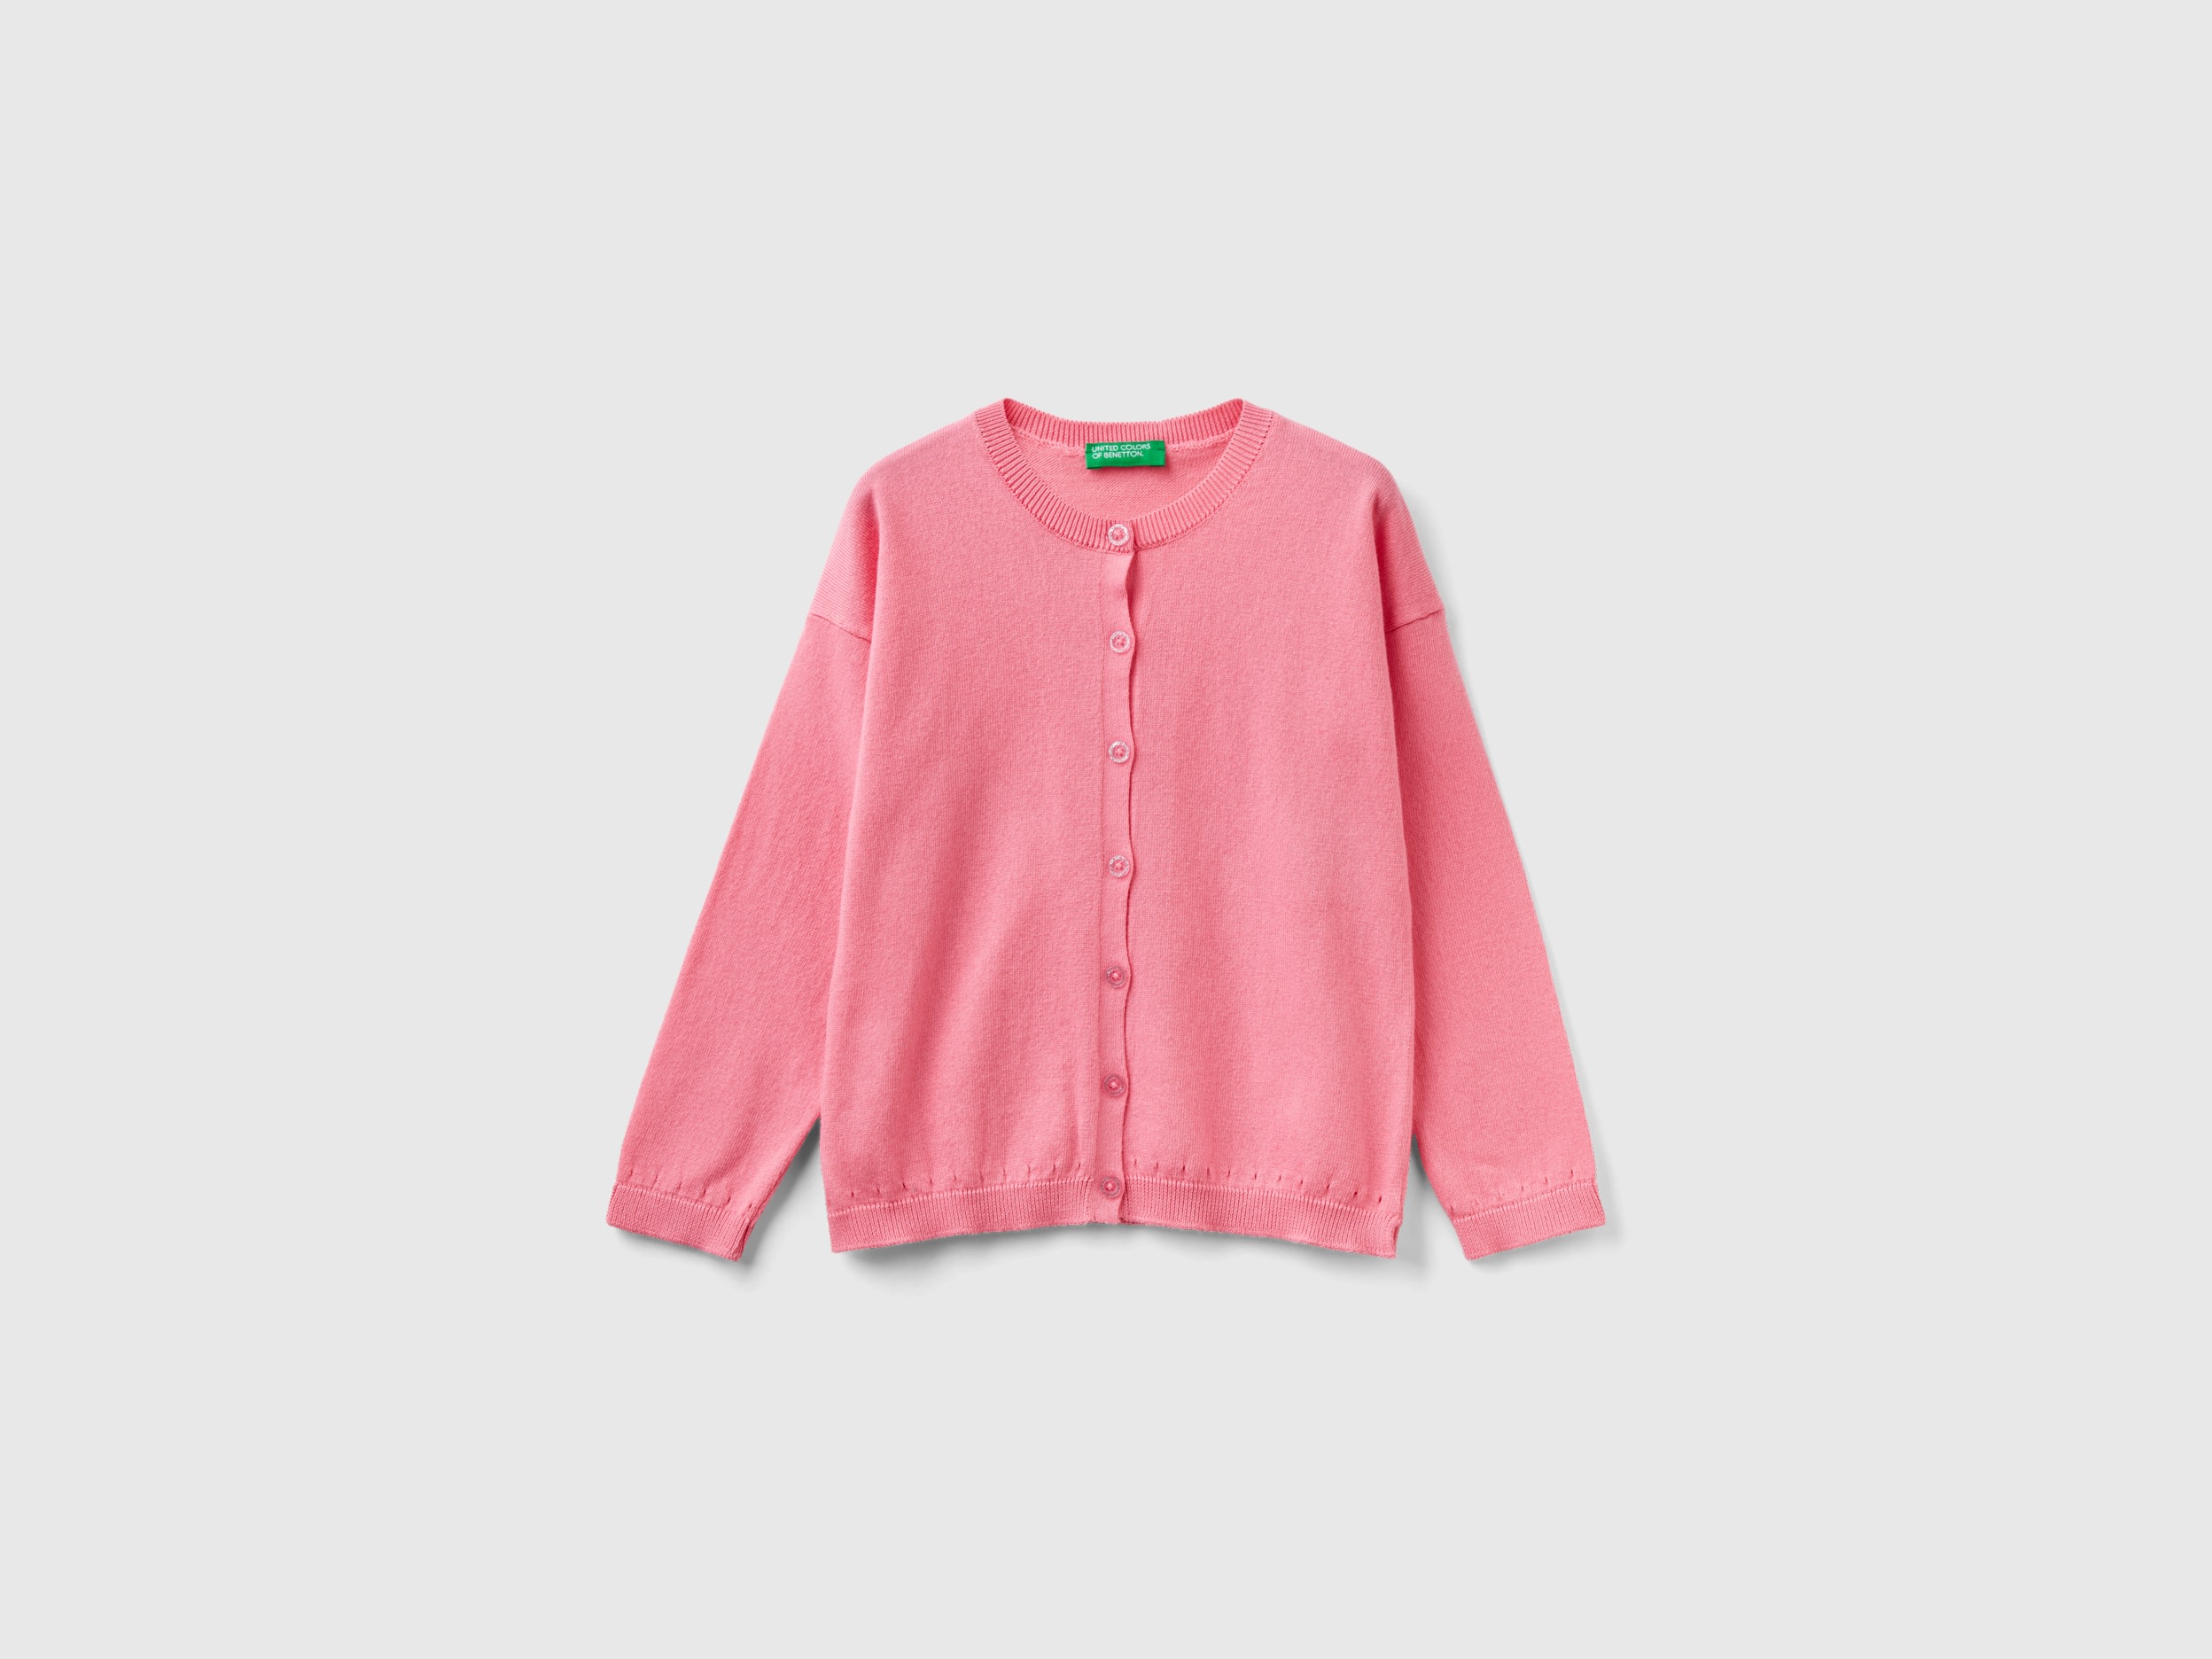 Benetton, Cardigan With Glittery Buttons, size 5-6, Pink, Kids